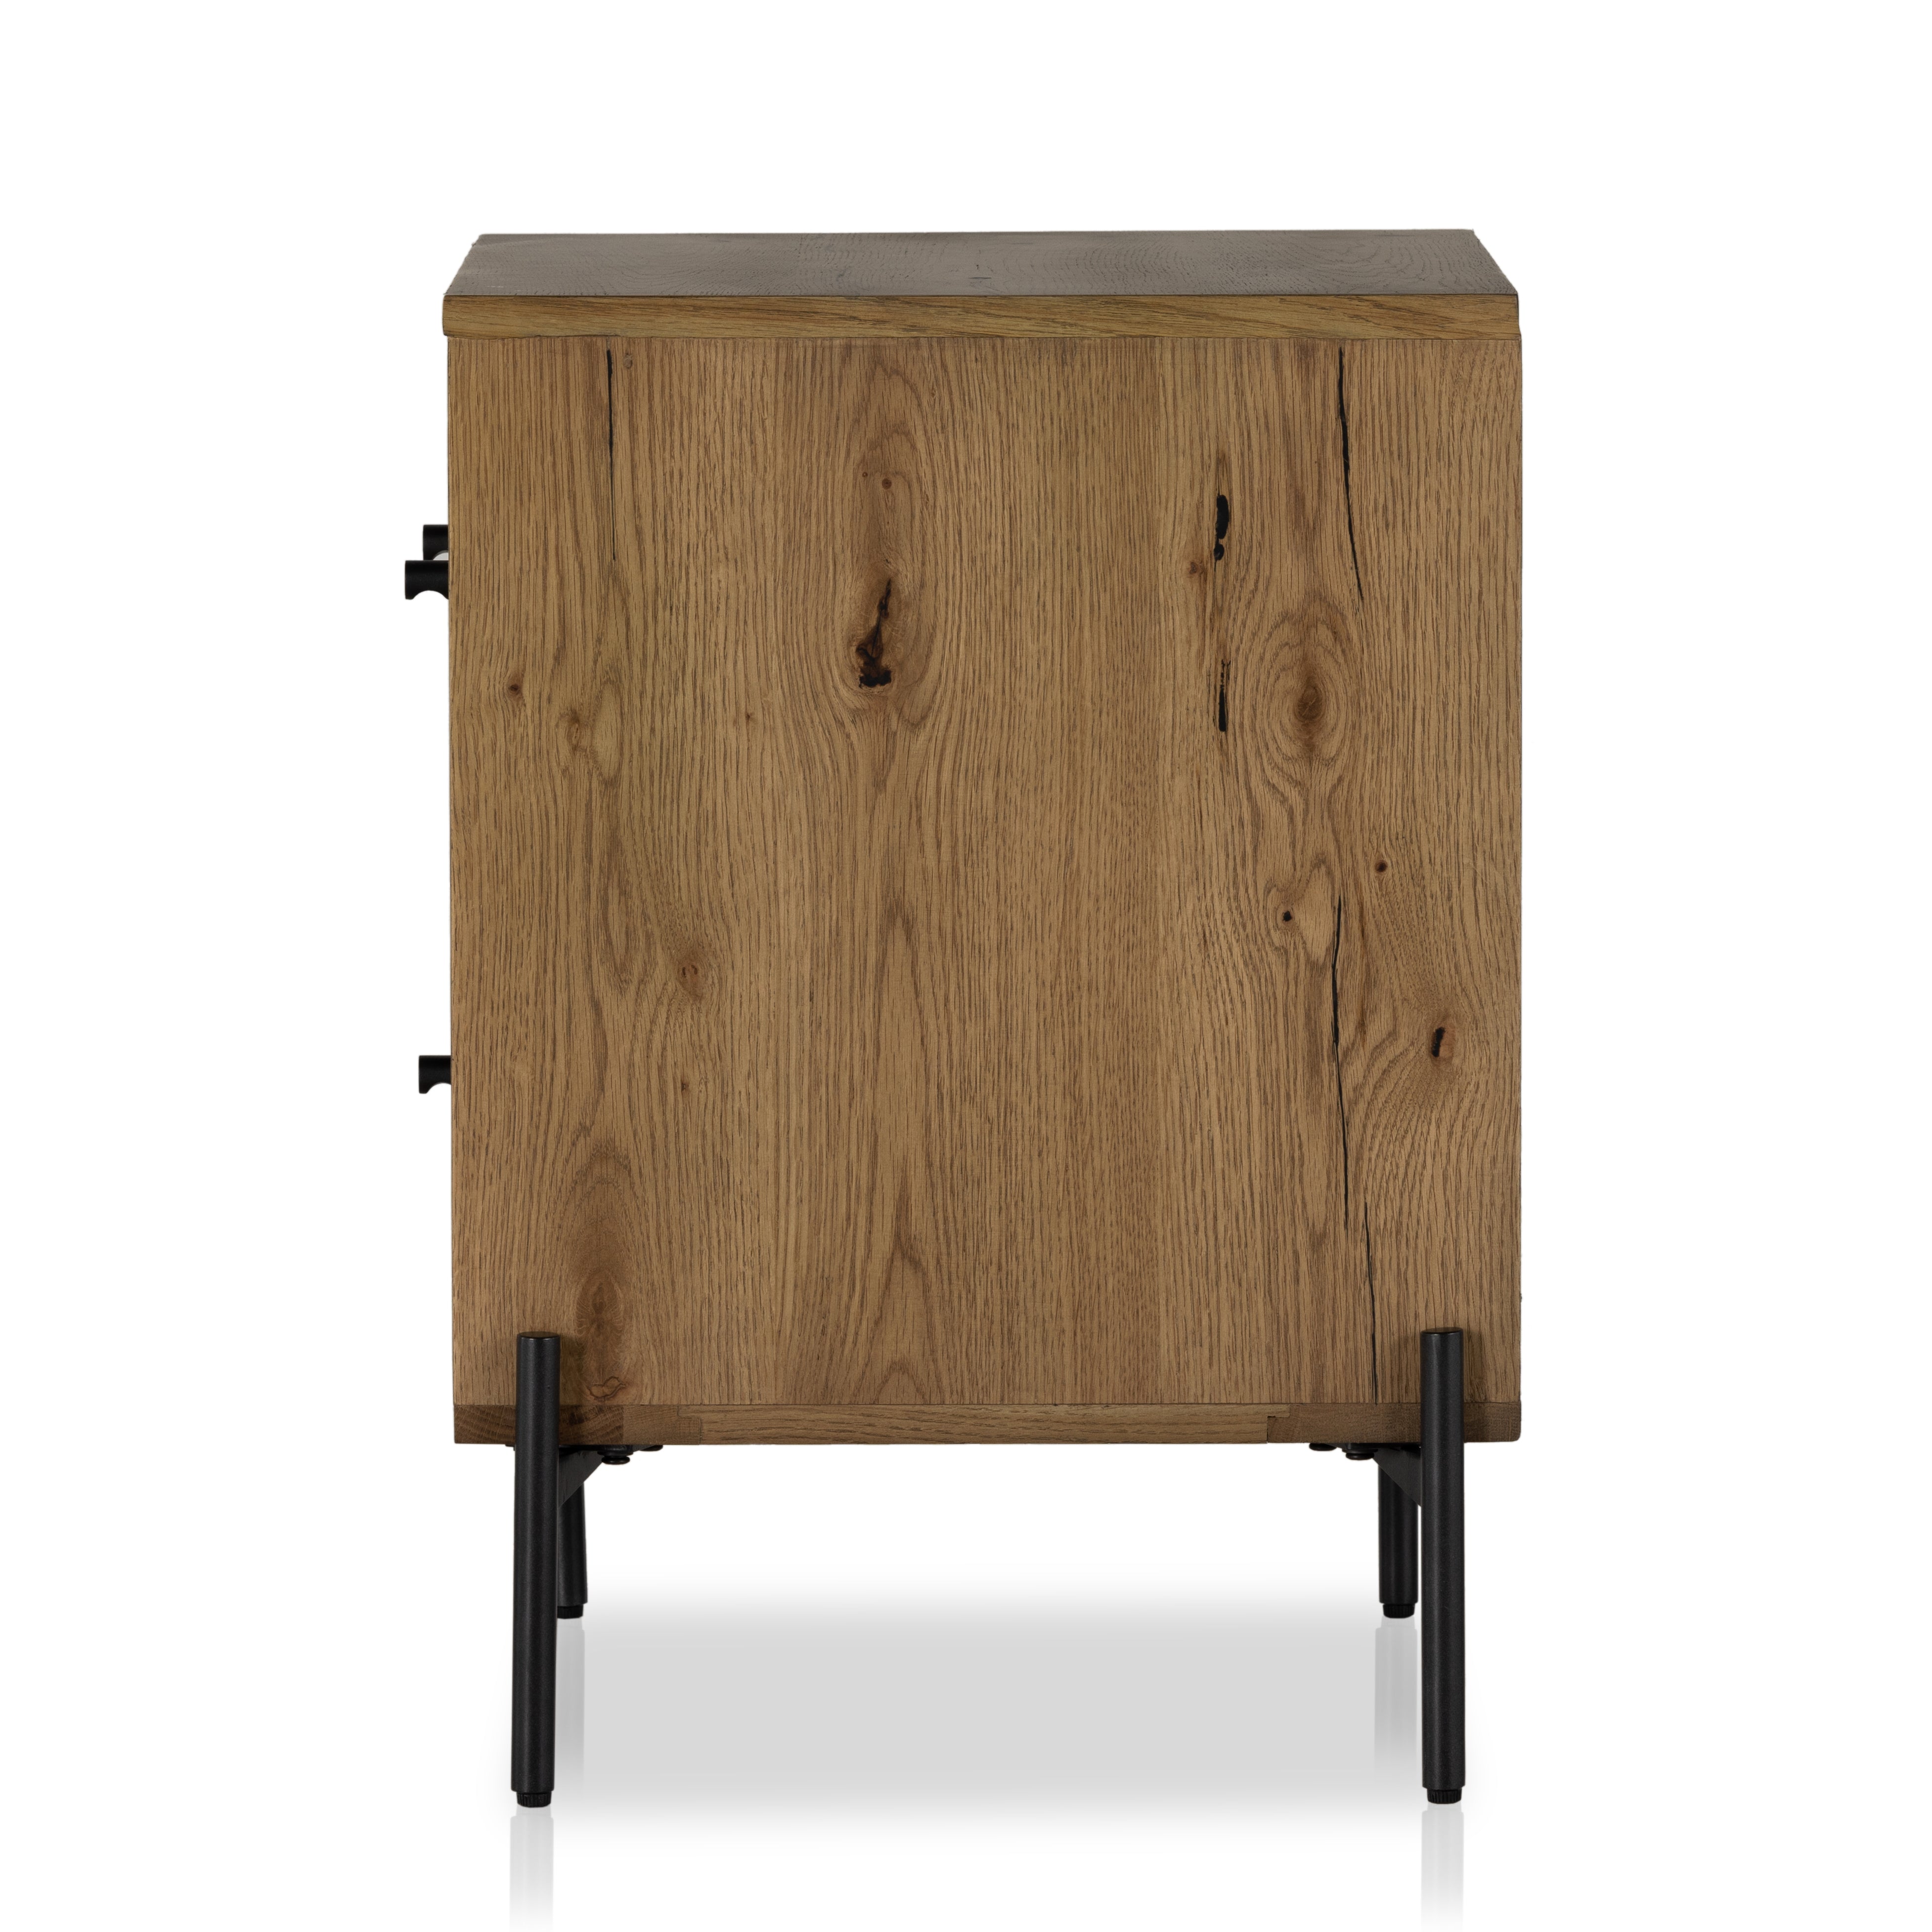 The Eaton Amber Oak Resin Nightstand boasts a classic, timeless style with its intricate details and warm oak finish. Crafted from durable resin, it's the perfect accent piece for your home. Amethyst Home provides interior design, new construction, custom furniture, and area rugs in the Laguna Beach metro area.